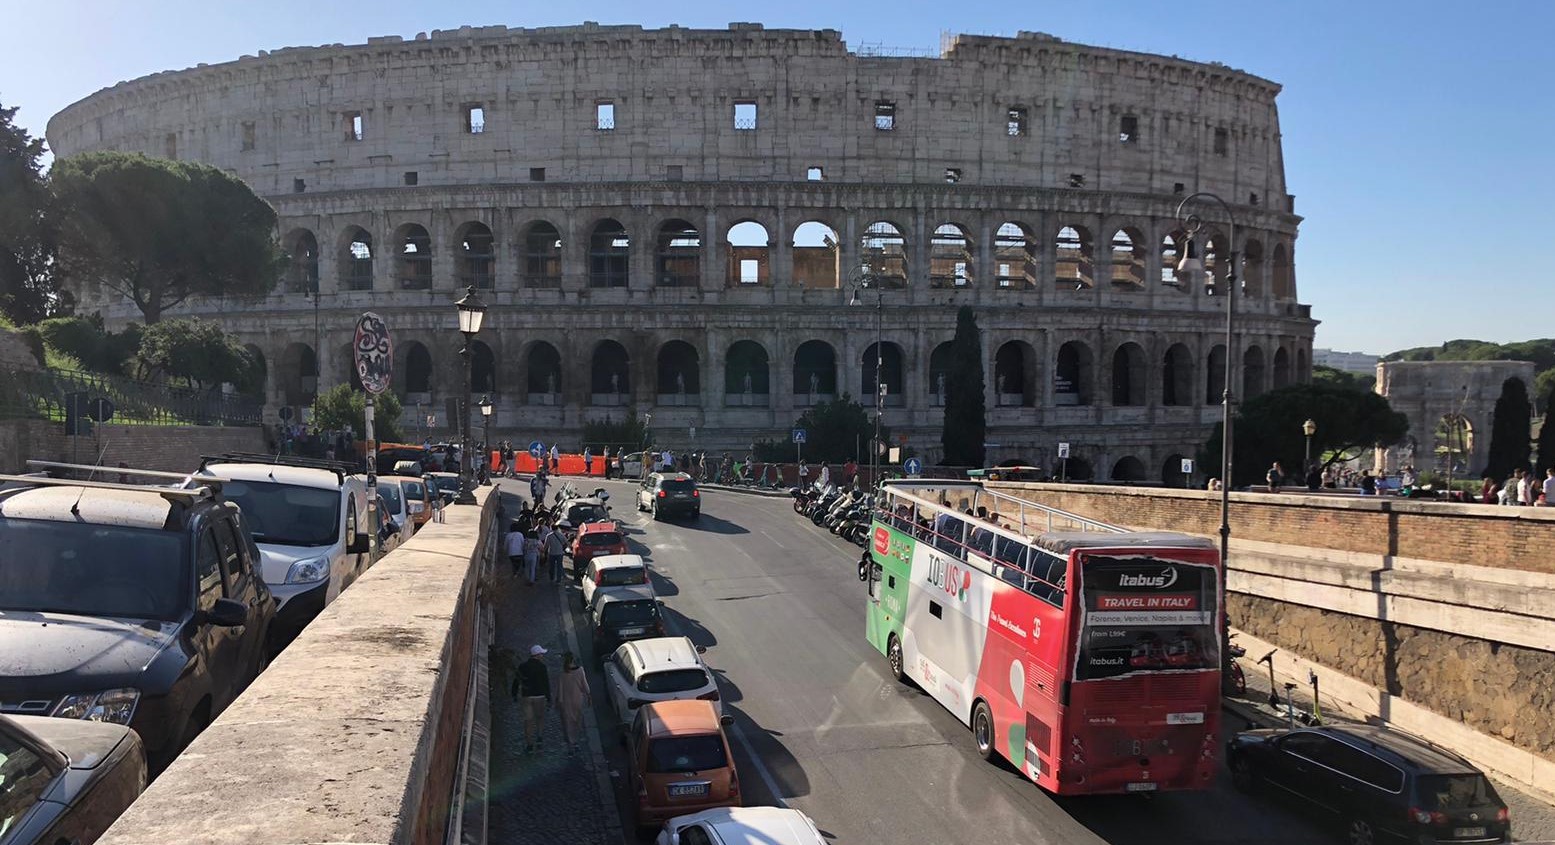 Colosseum Skip-the-Line Ticket and Panoramic Bus Tour